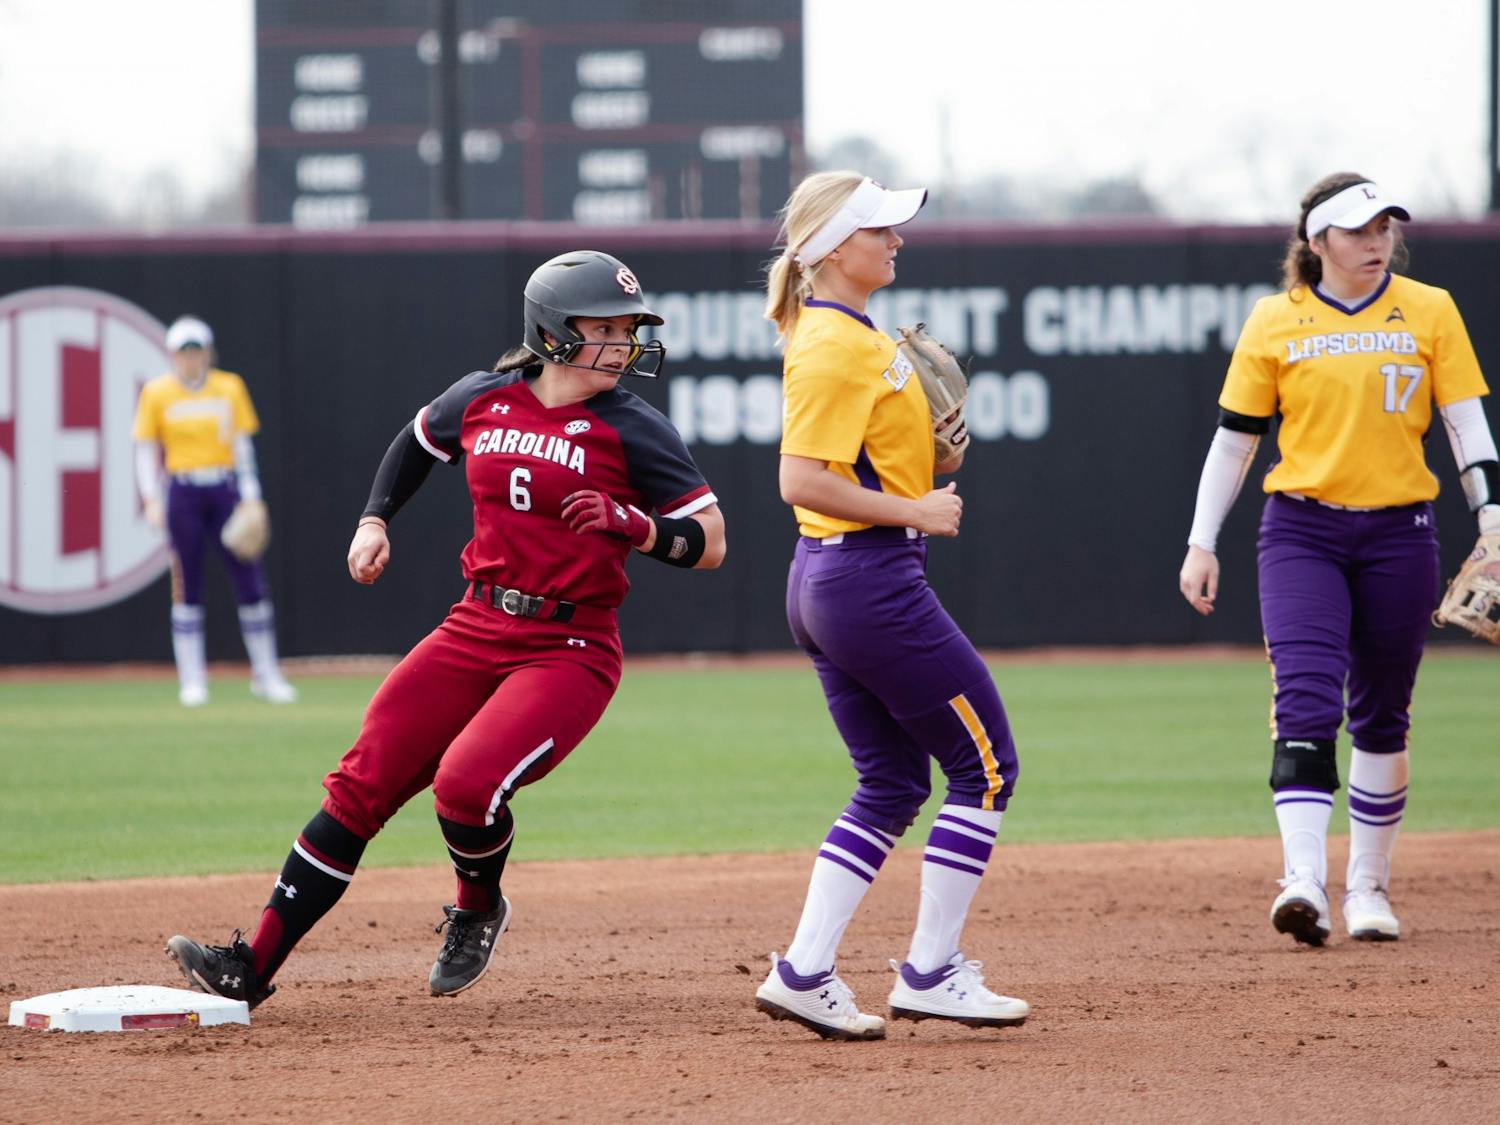 Senior catcher Jordan Fabian looks back to her teammates as she taps second base during a game against Lipscomb on Saturday, Feb. 12, 2022 in Columbia, SC